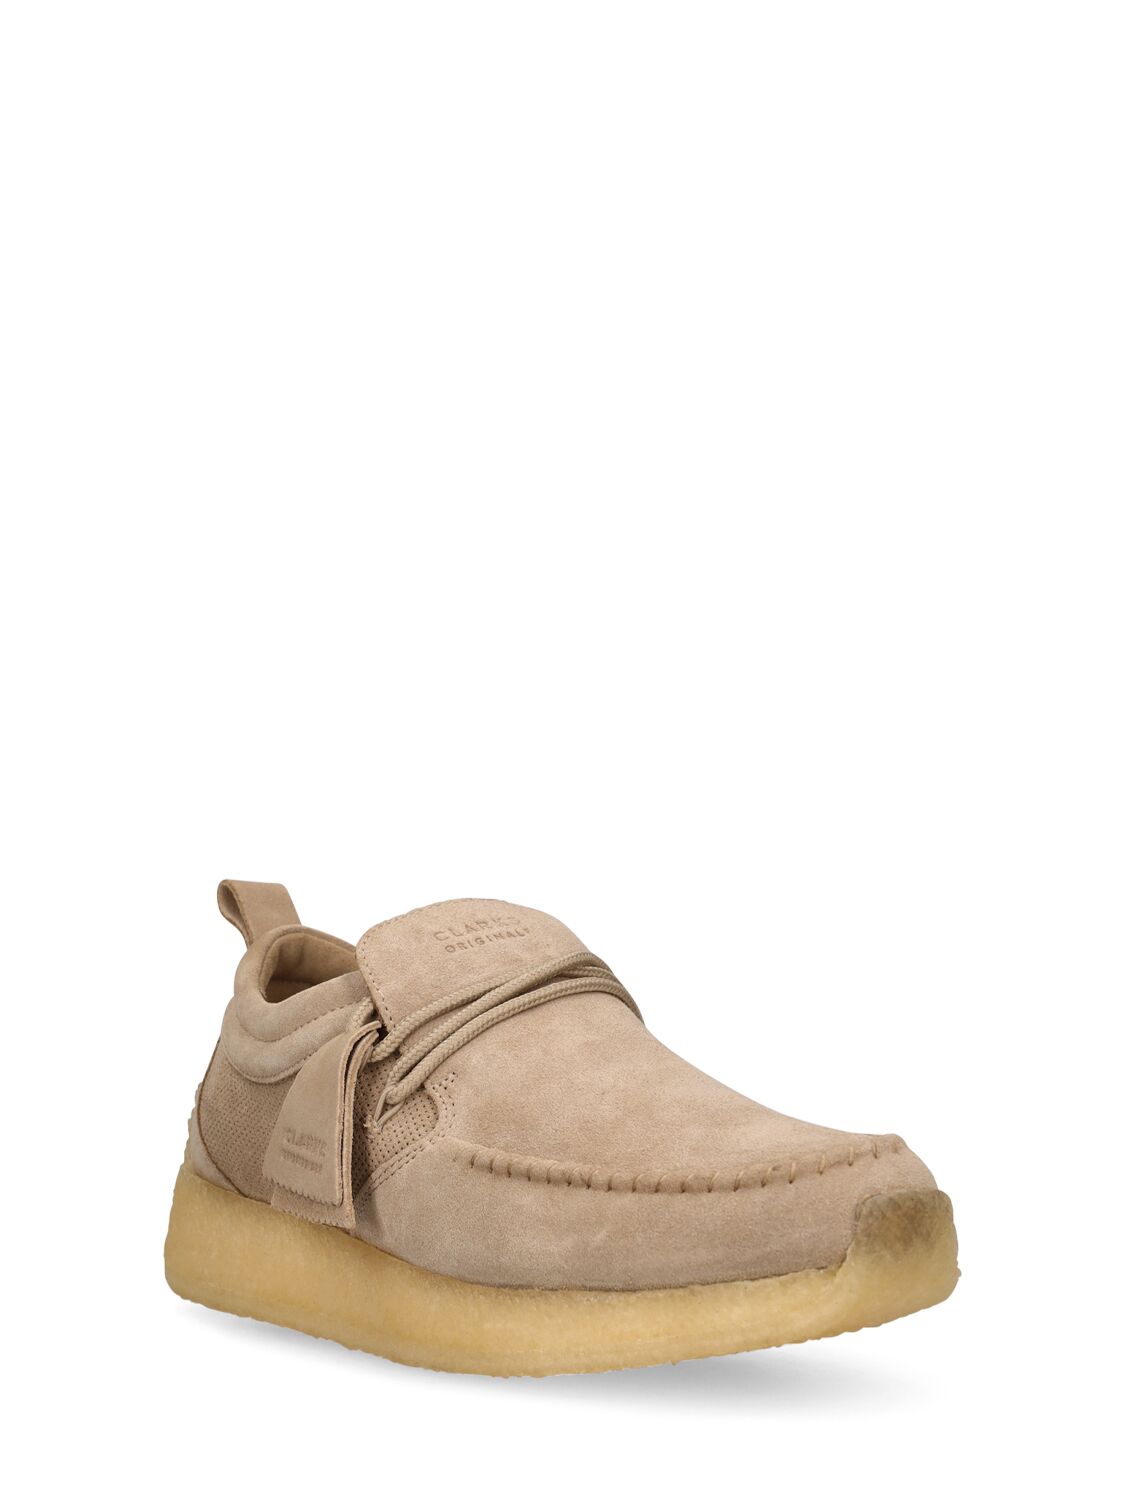 Shop Clarks Originals Maycliffe Suede Lace-up Shoes In Light Sand